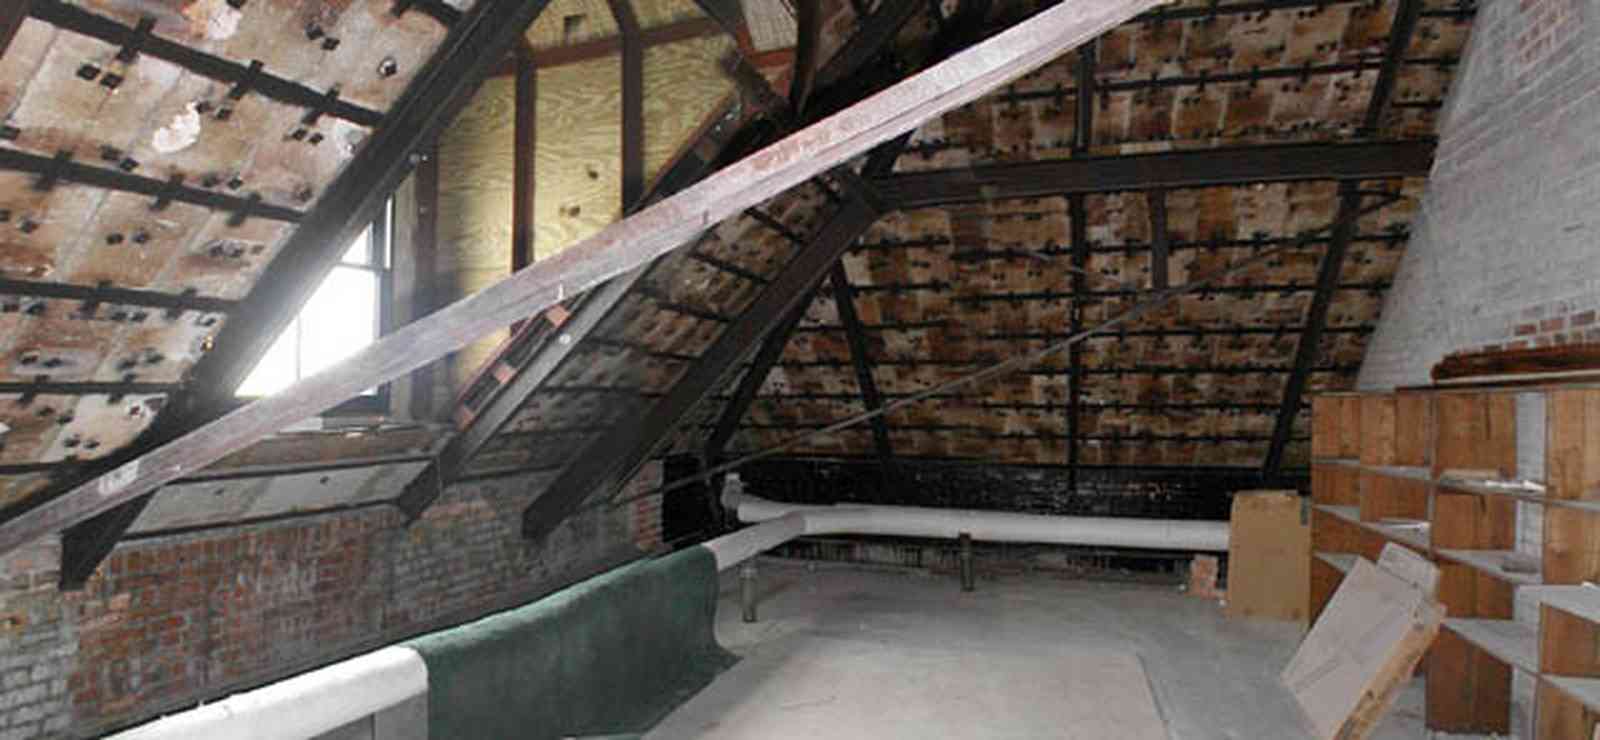 Pensacola:-Palafox-Historic-District:-Escambia-County-Courthouse_14.jpg:  attic, roof tiles, metal spring tension braces, brick walls